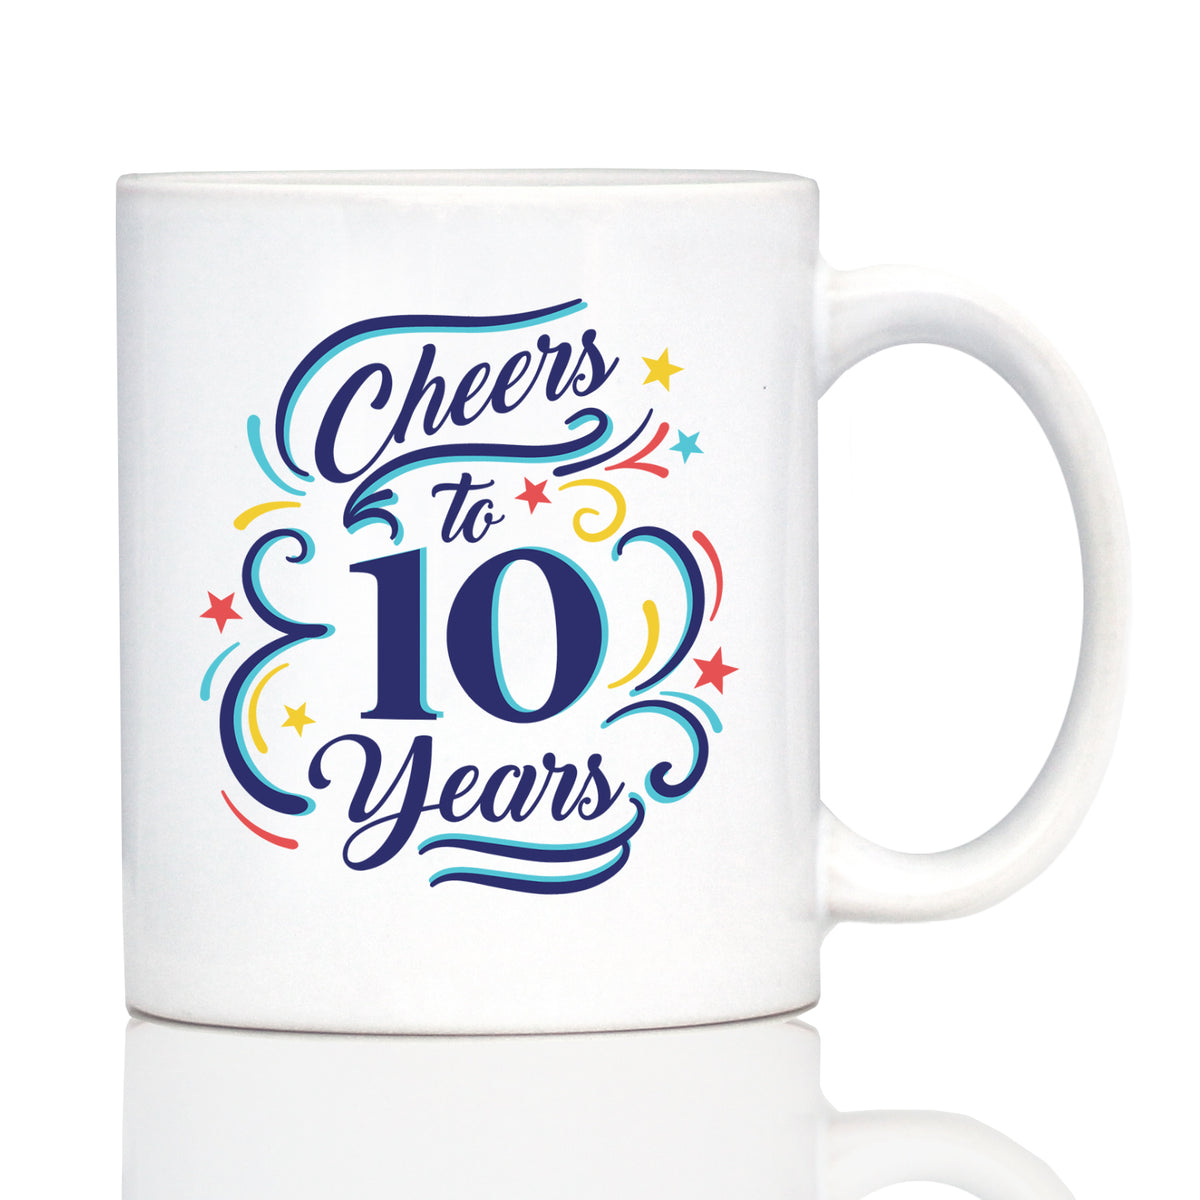 Cheers to 10 Years - Coffee Mug Gifts for Women &amp; Men - 10th Anniversary Party Decor